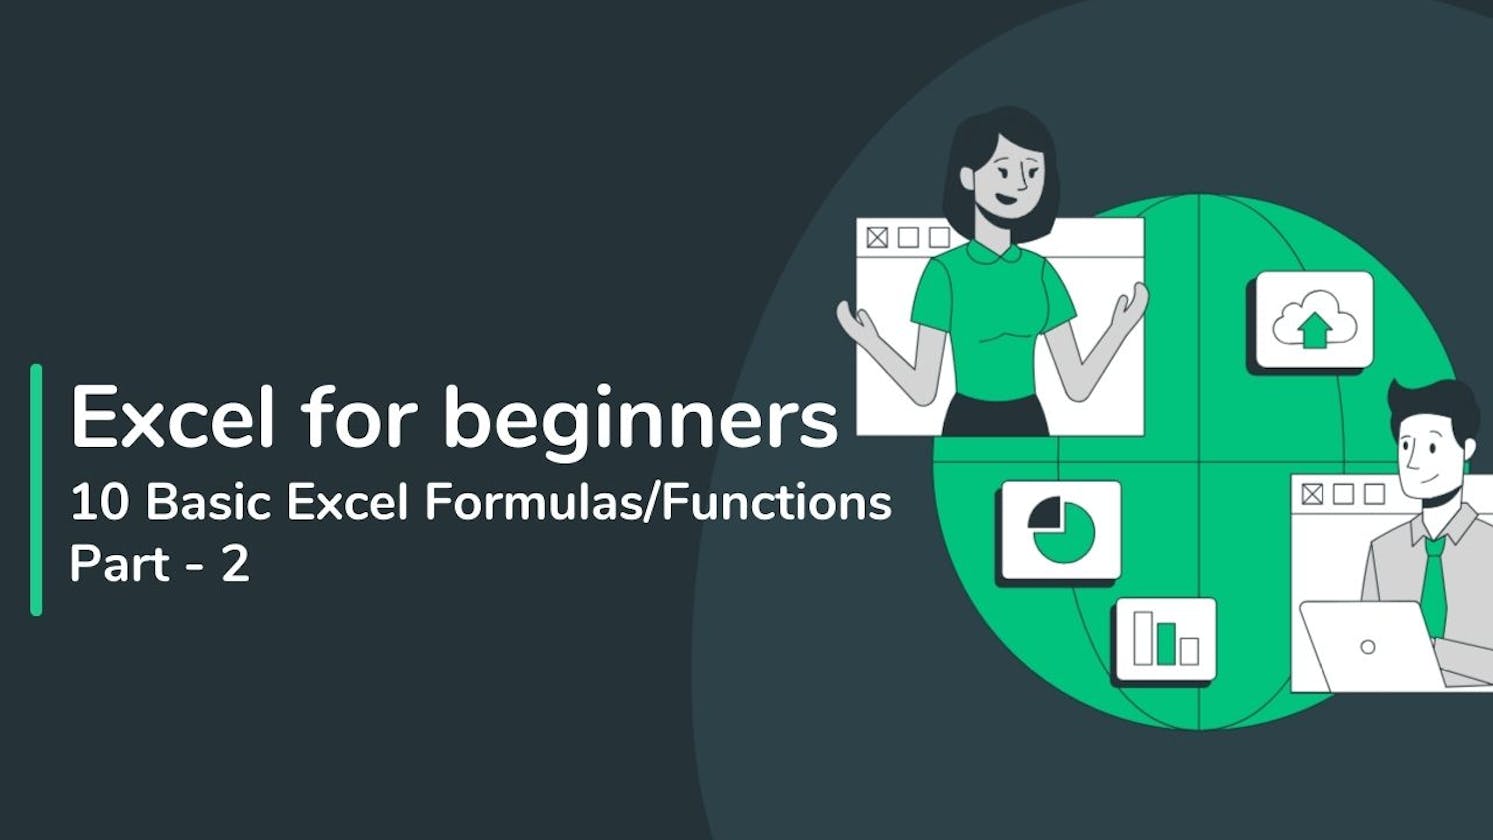 Excel for beginners: 10 Basic Excel Formulas/Functions | Part -2